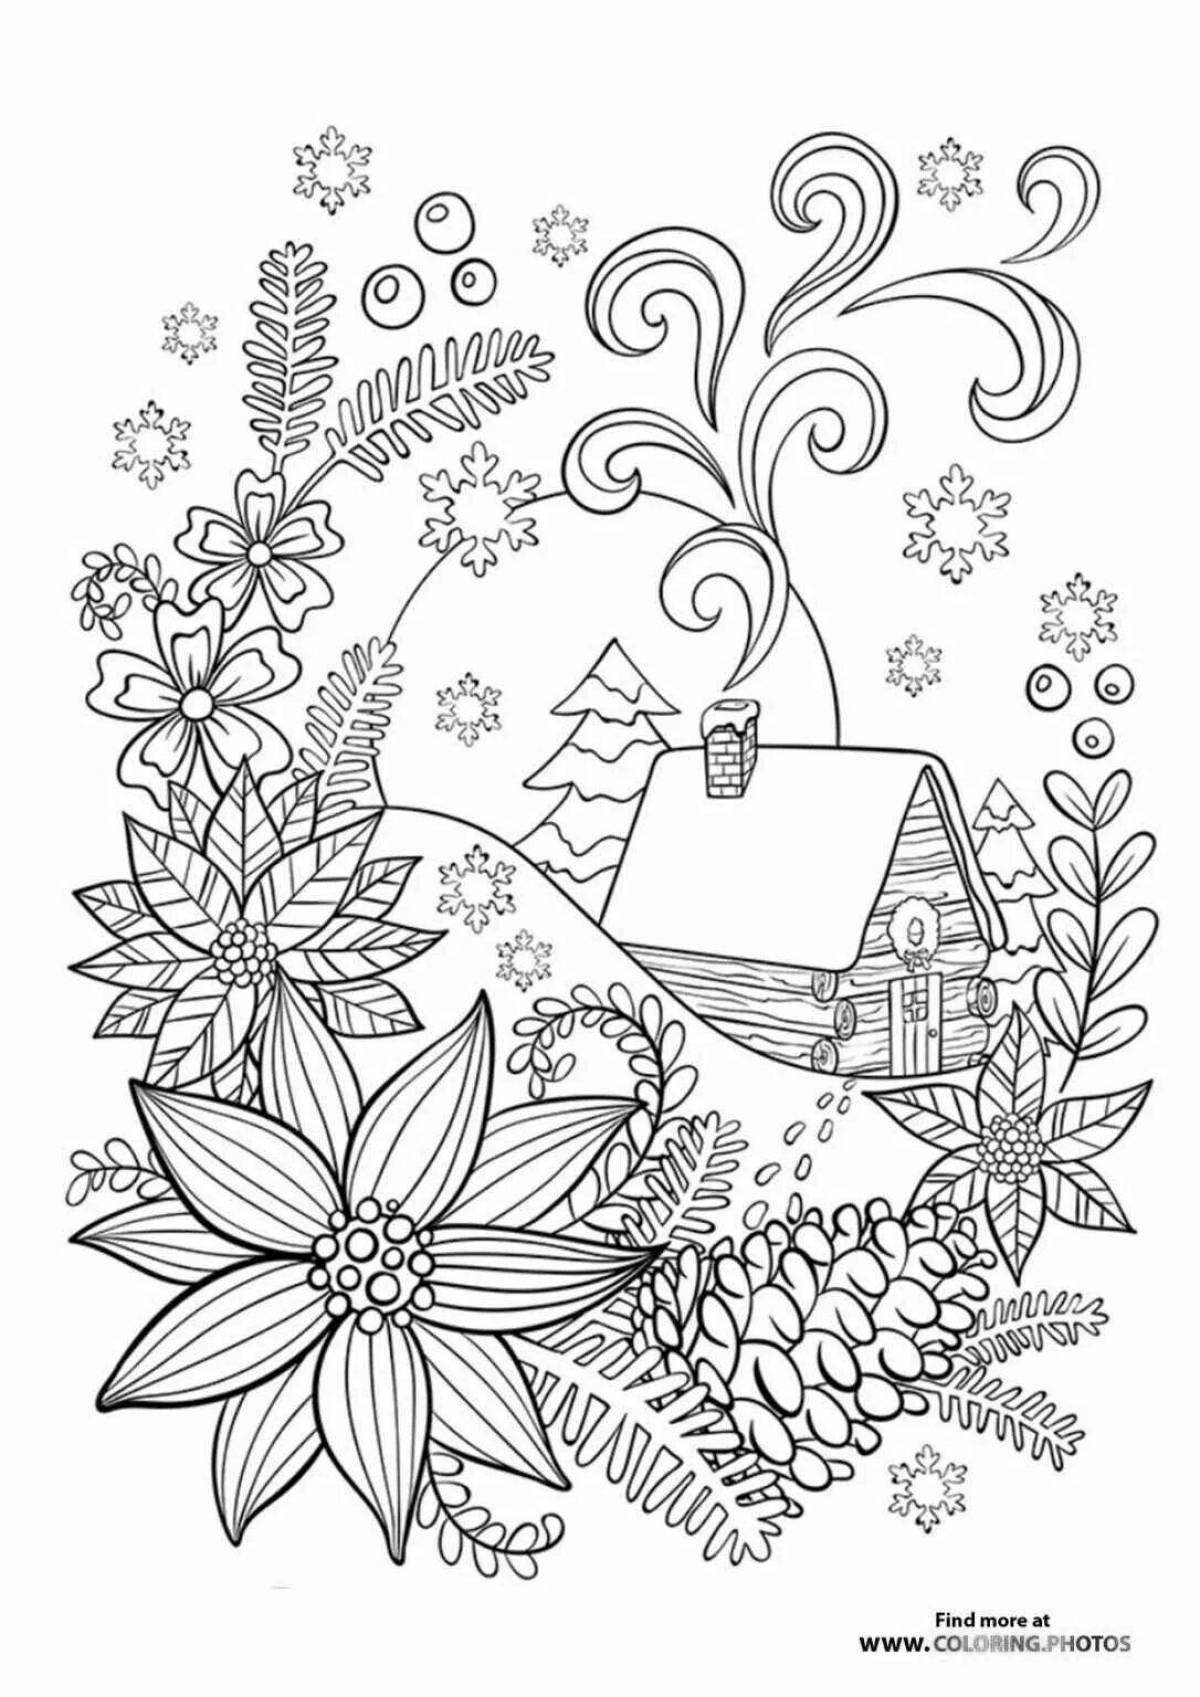 Exuberant Christmas coloring book for adults